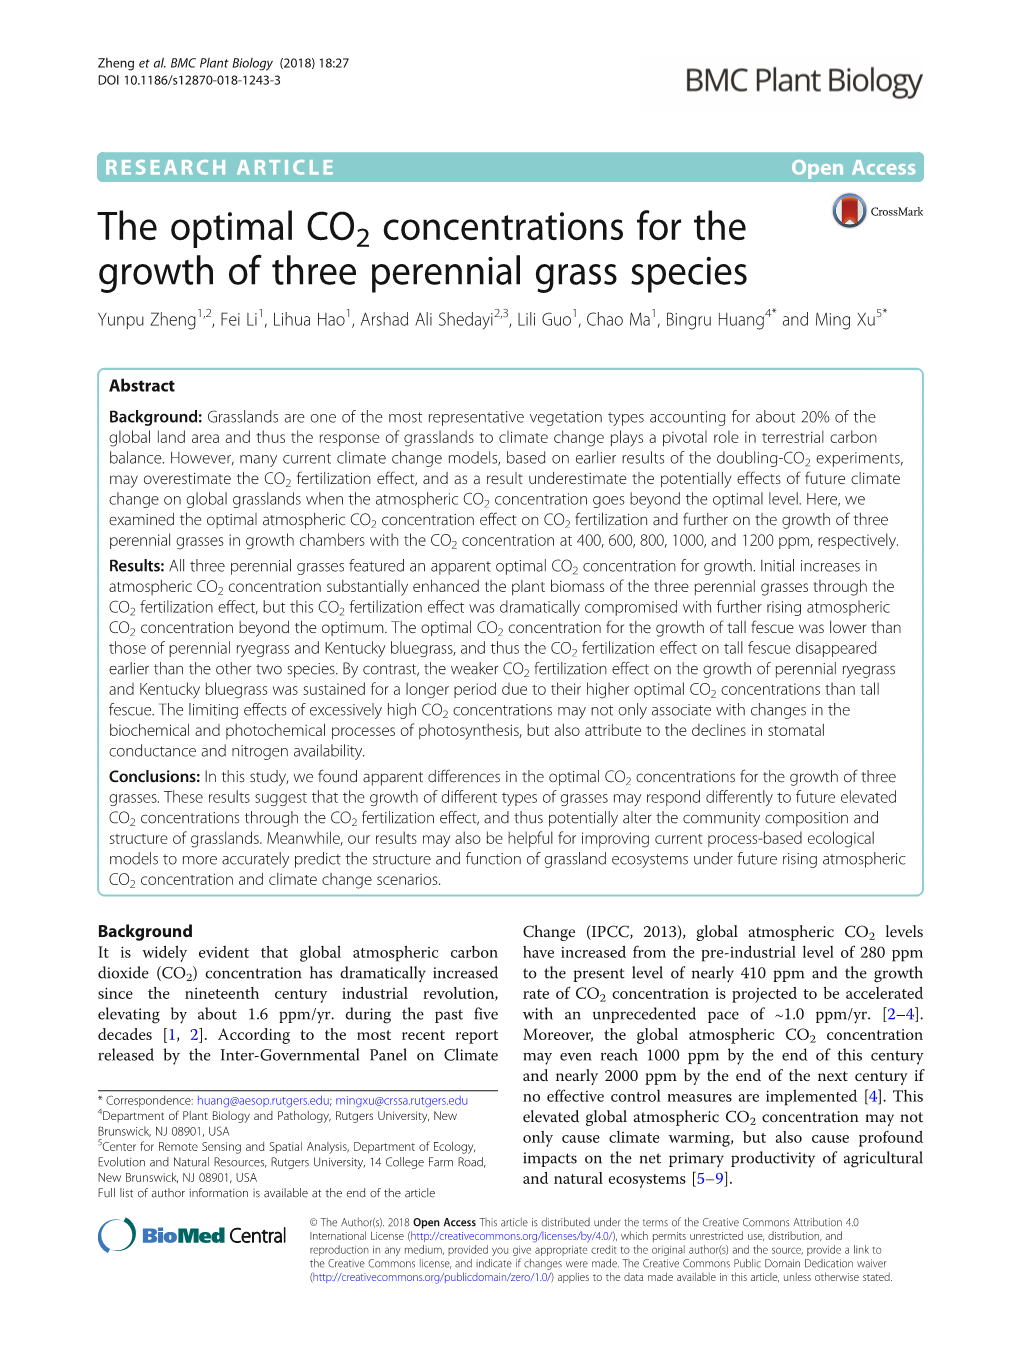 The Optimal CO2 Concentrations for the Growth of Three Perennial Grass